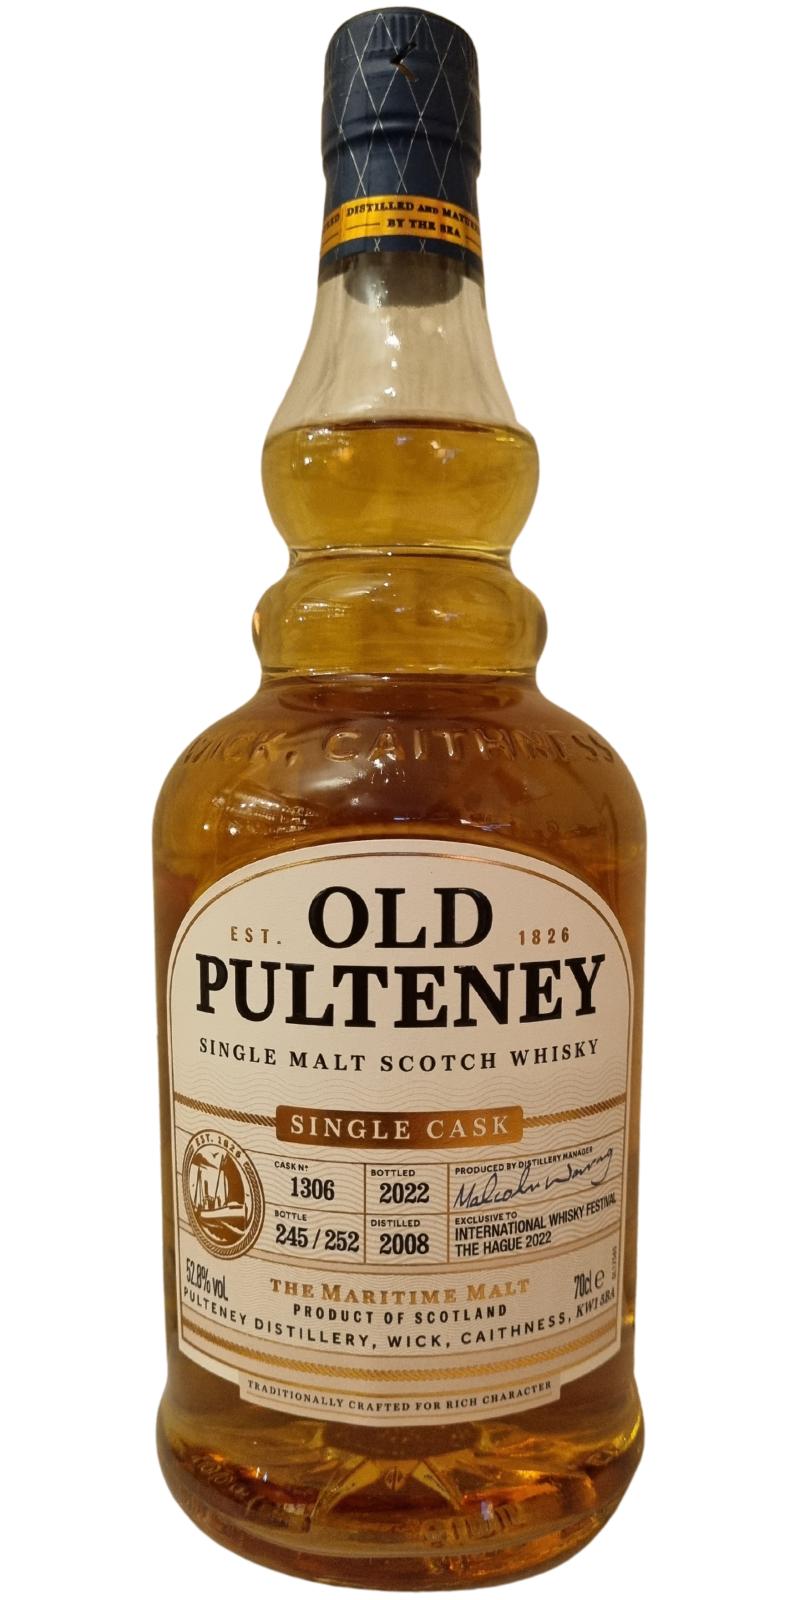 Old Pulteney 2008 International Whisky Festival The Hague 2022 52.8% 700ml